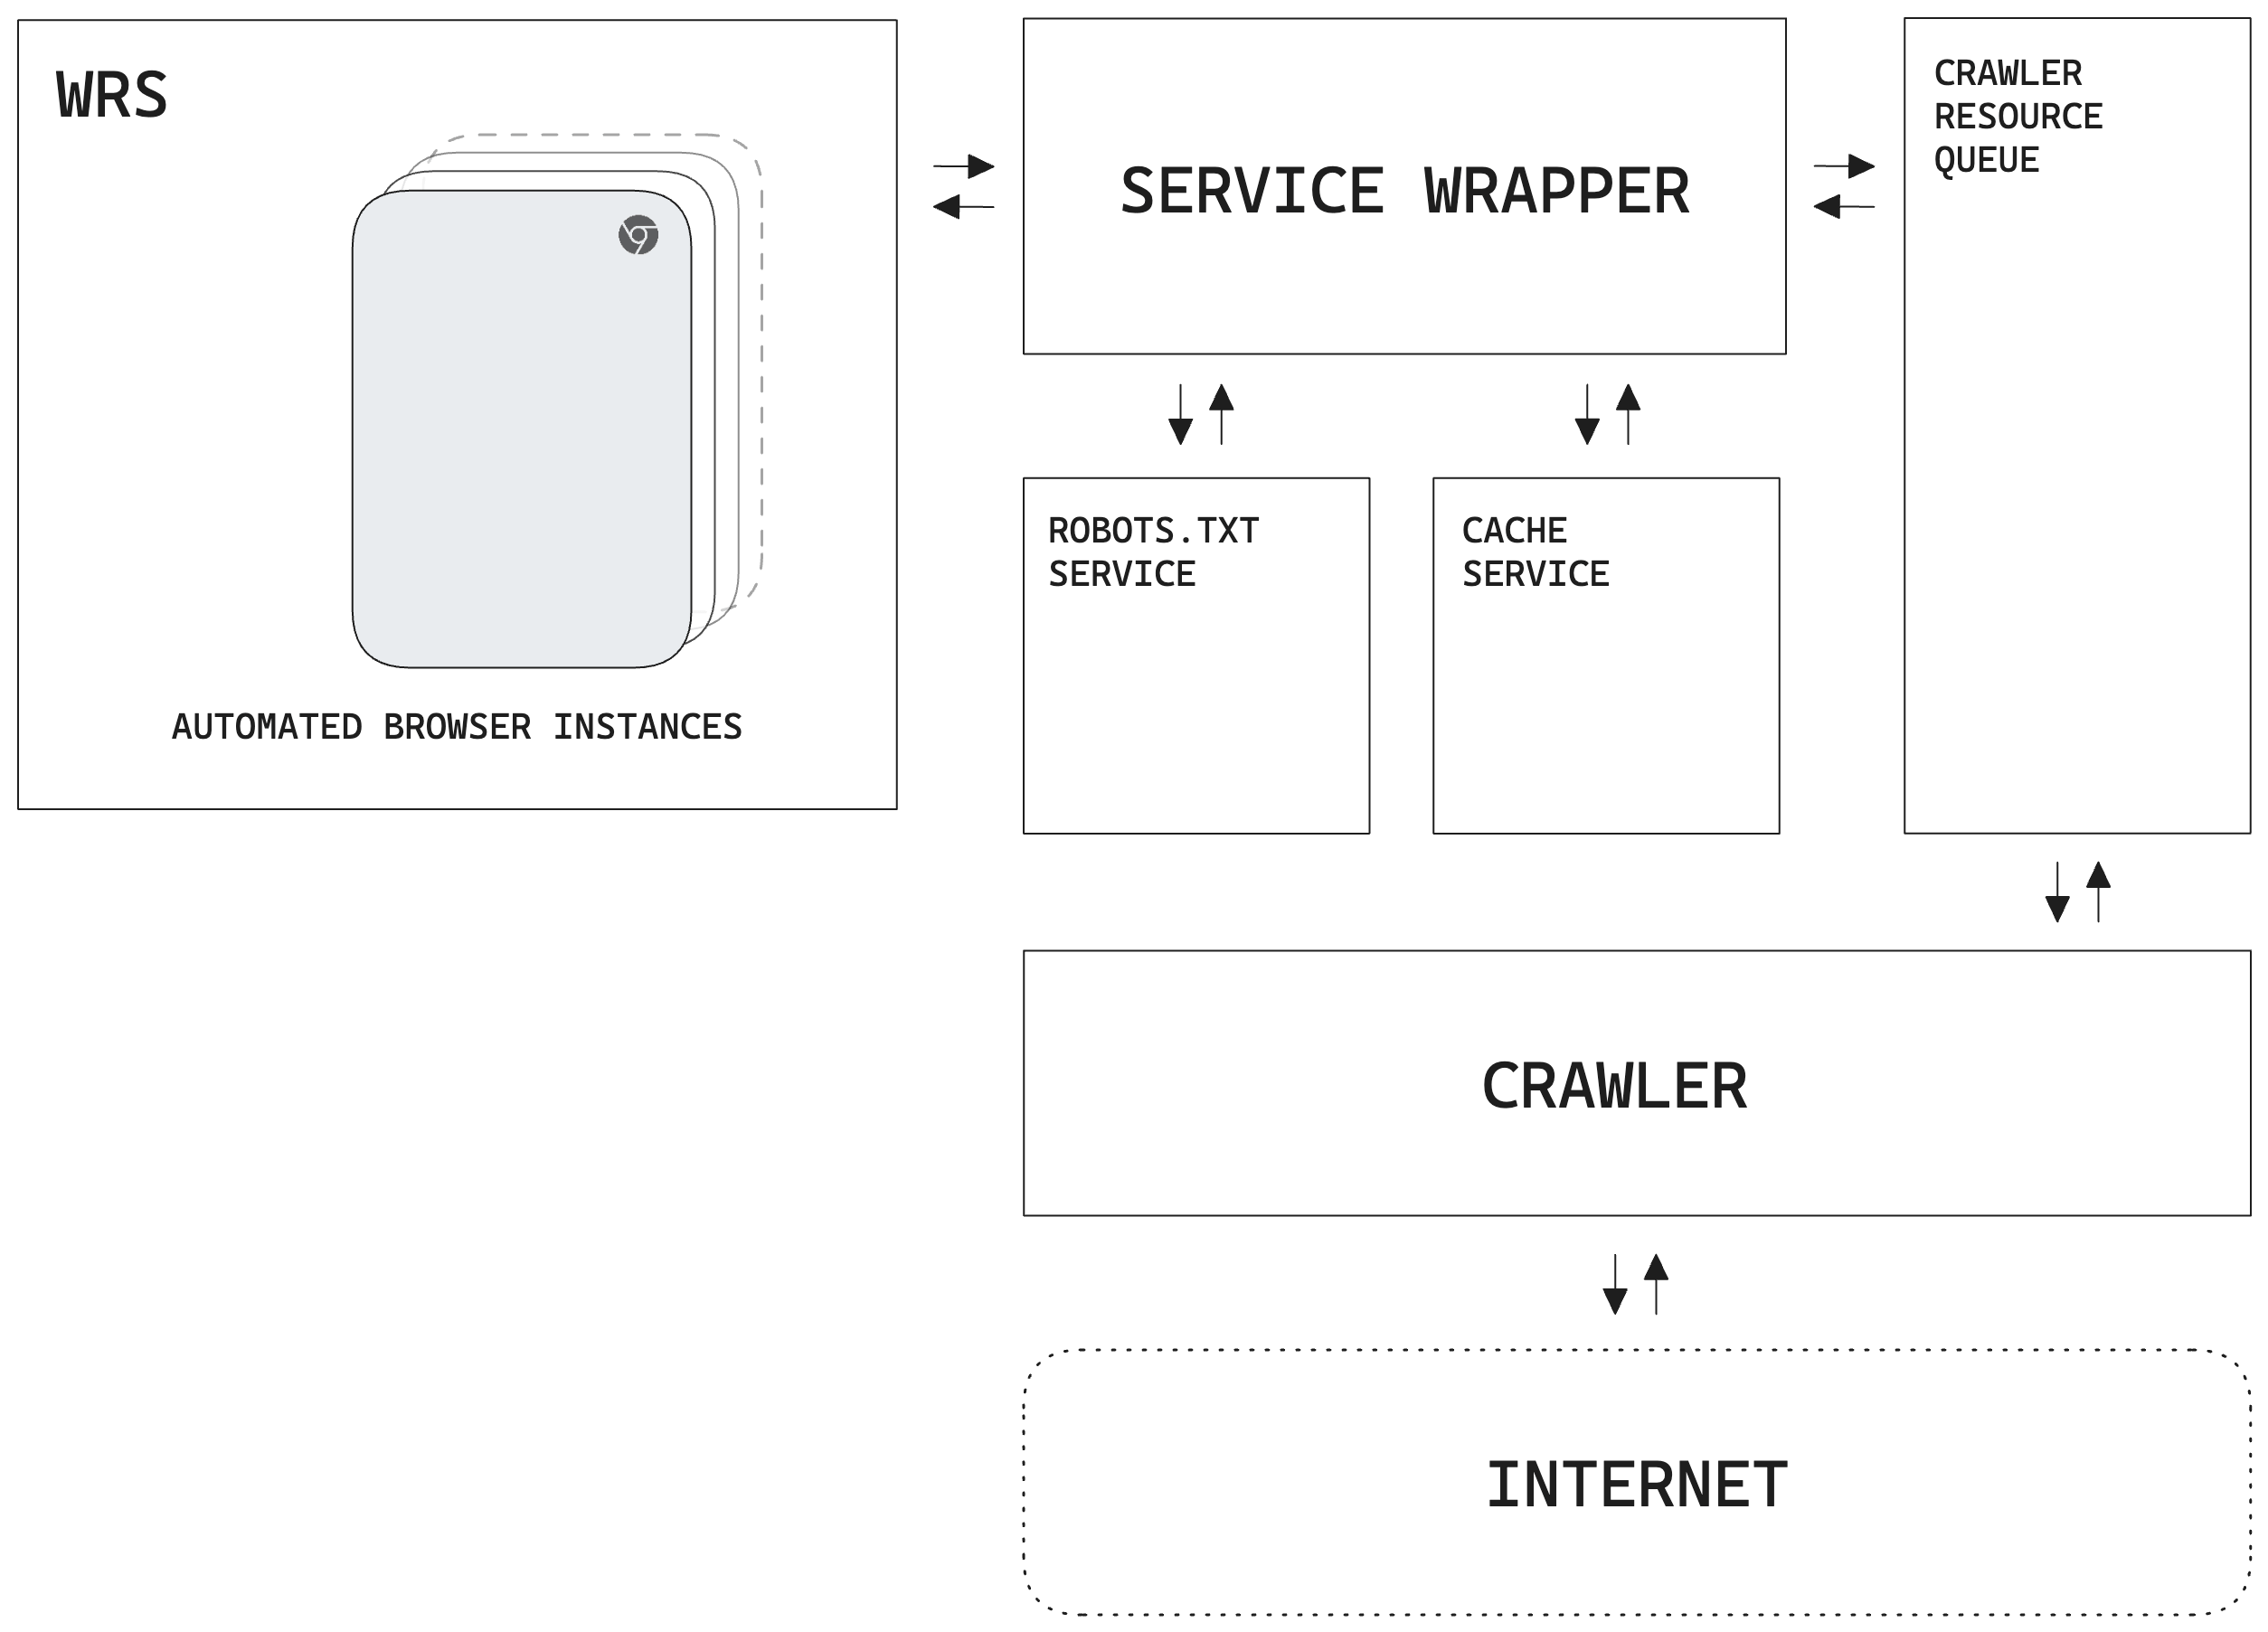 Step-by-step process flowchart depicting Google WRS browser instance rendering, service wrapper interception of network requests, robots.txt compliance check, handling of disallowed requests, cache service evaluation, resource queueing, crawler retrieval, and dispatching of data back to the browser instance.